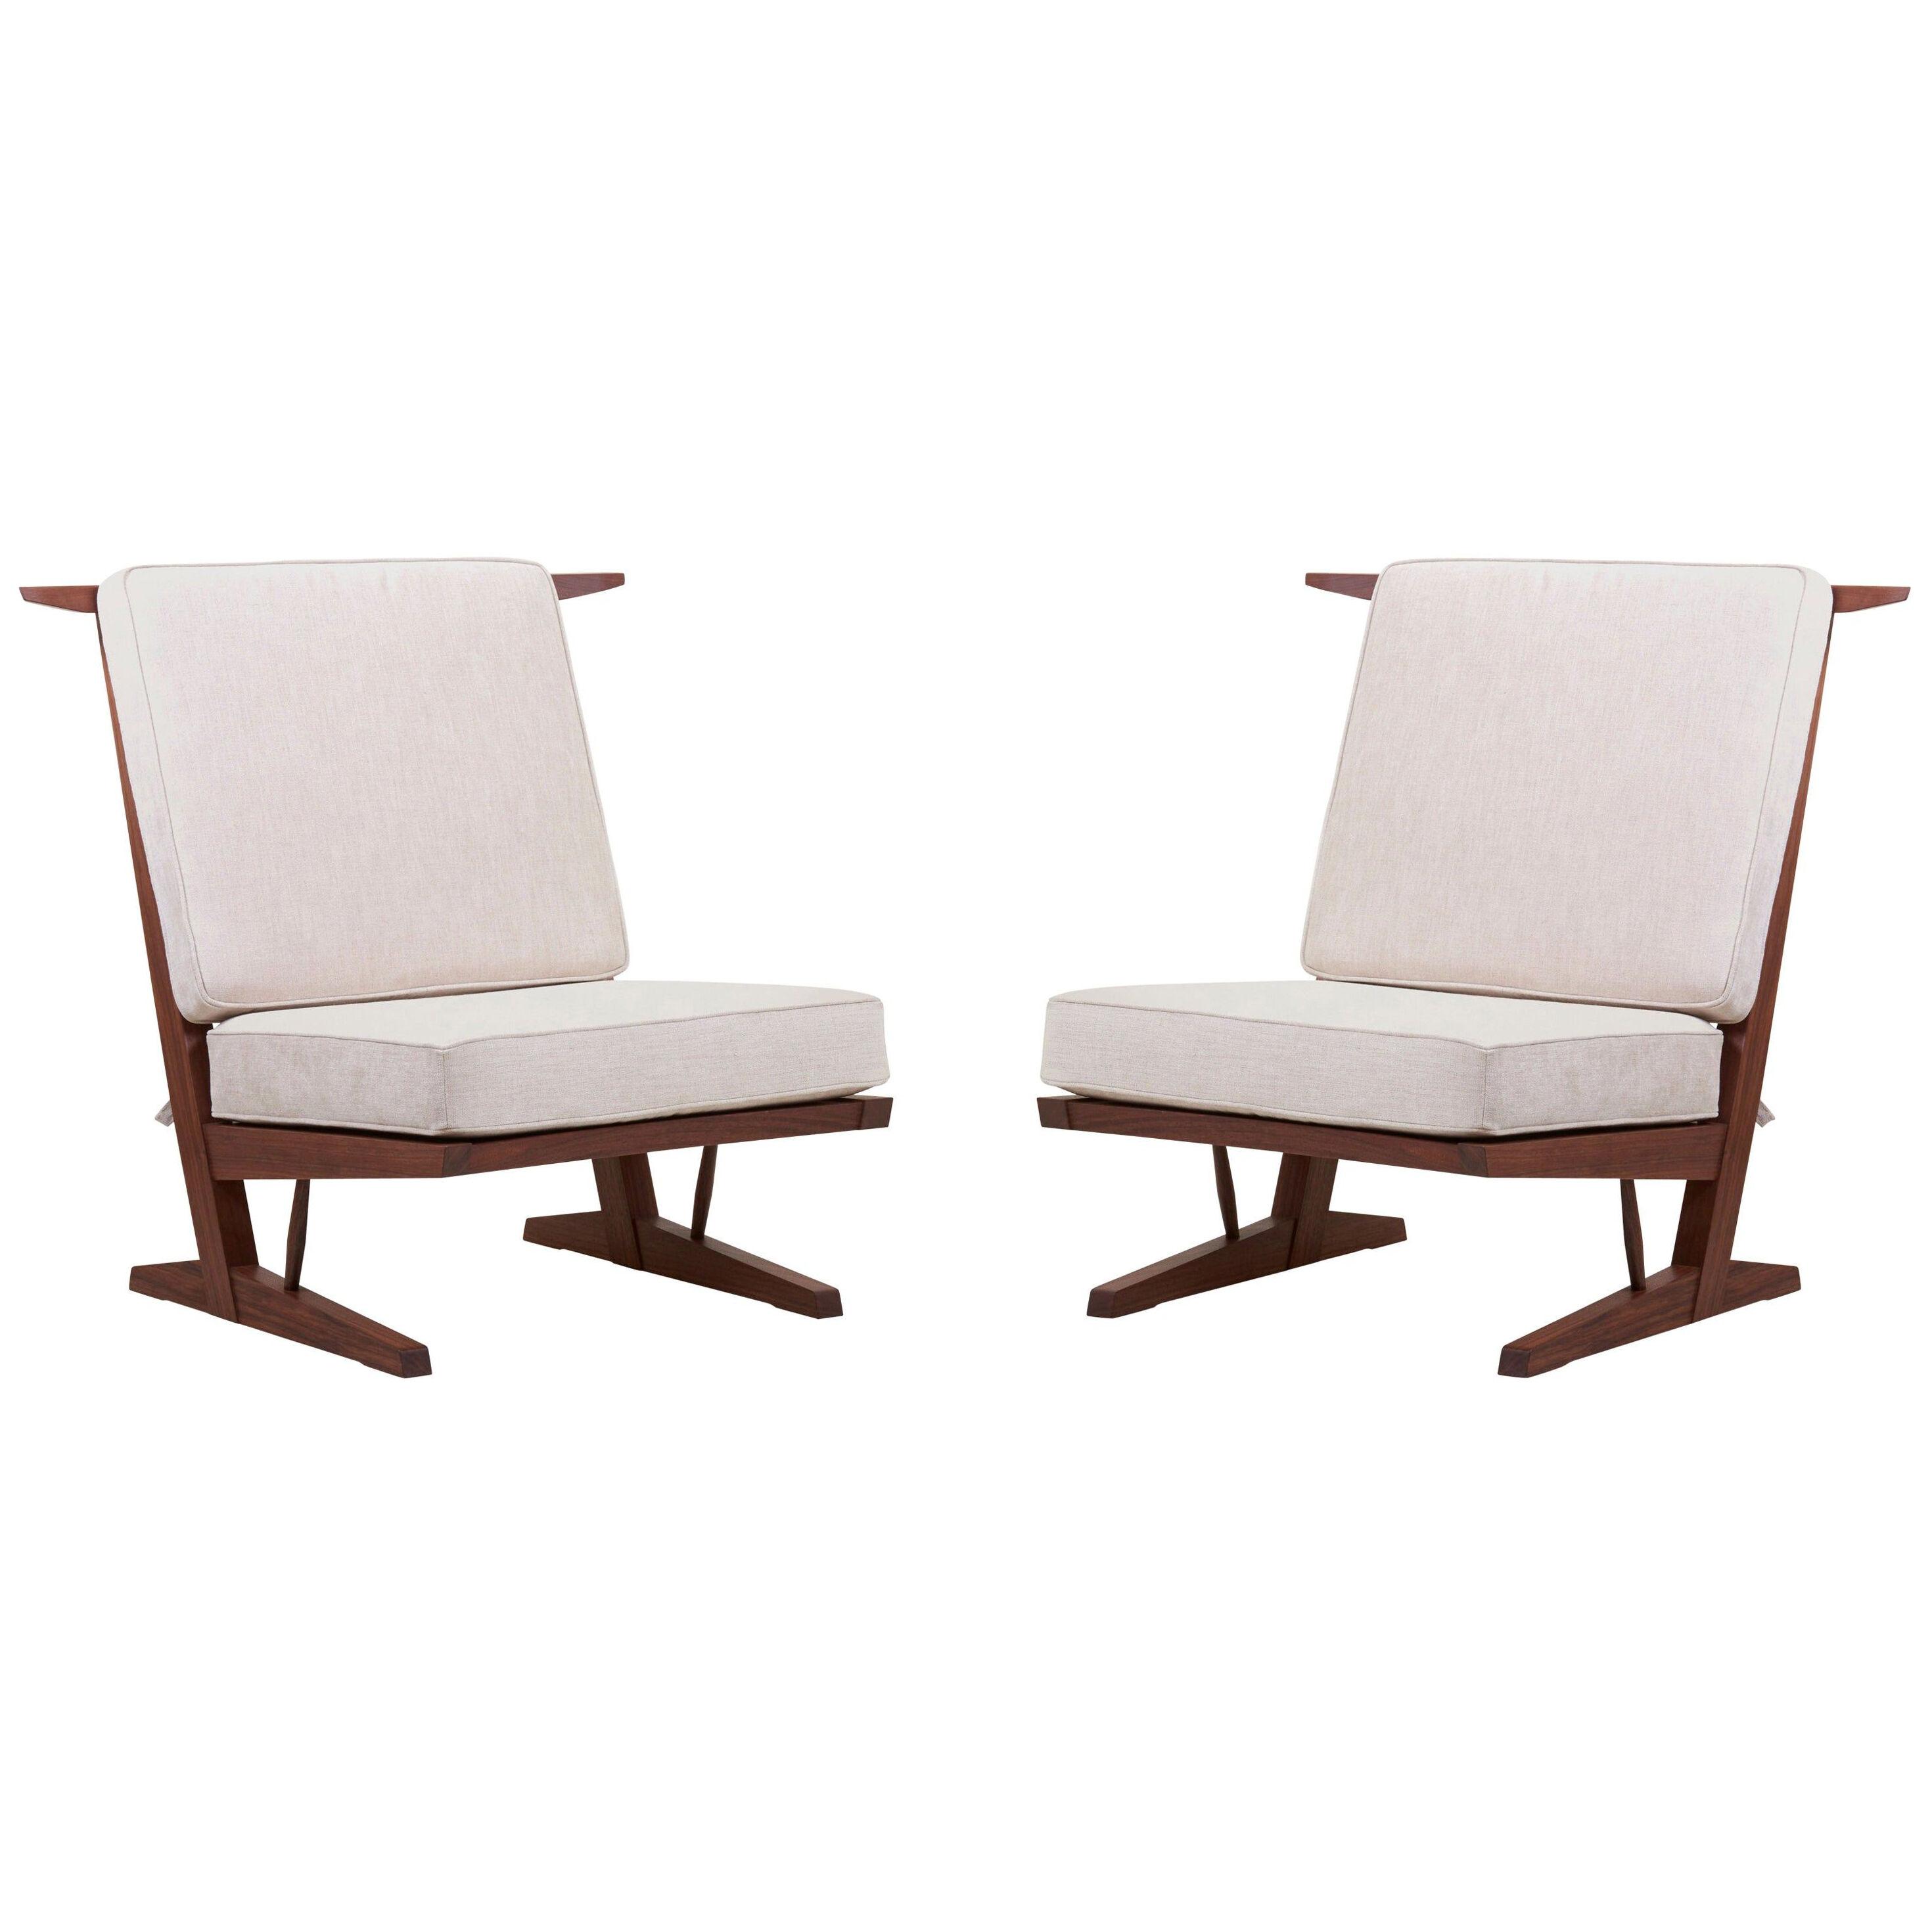 Pair of George Nakashima Conoid Lounge Chairs by Nakashima Woodworkers, US 2021